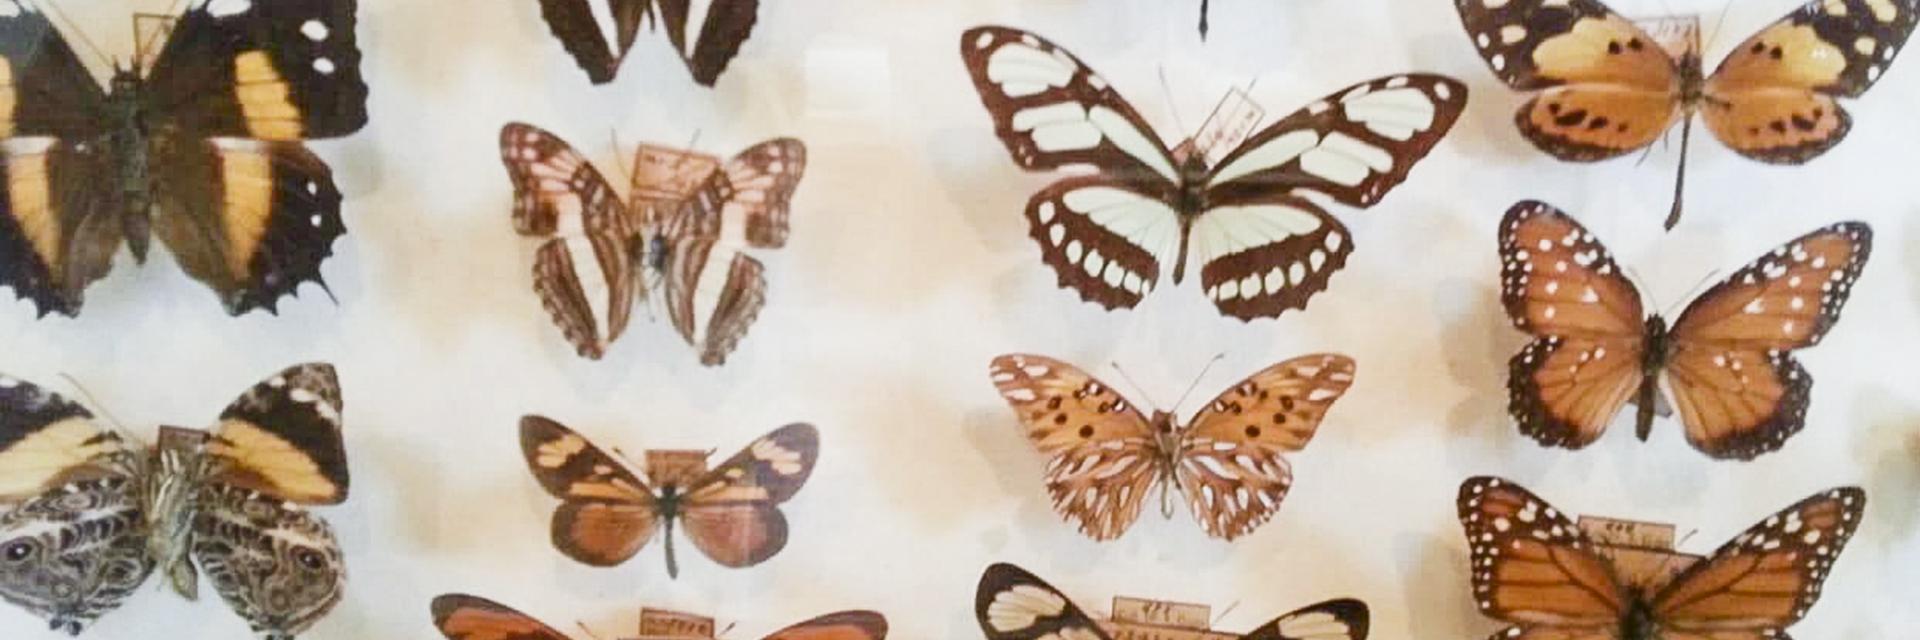 Butterfly Collection, Museu Nacional do Rio de Janeiro Photo by Maurobio. Licensed under the Creative Commons Attribution-Share Alike 4.0 International